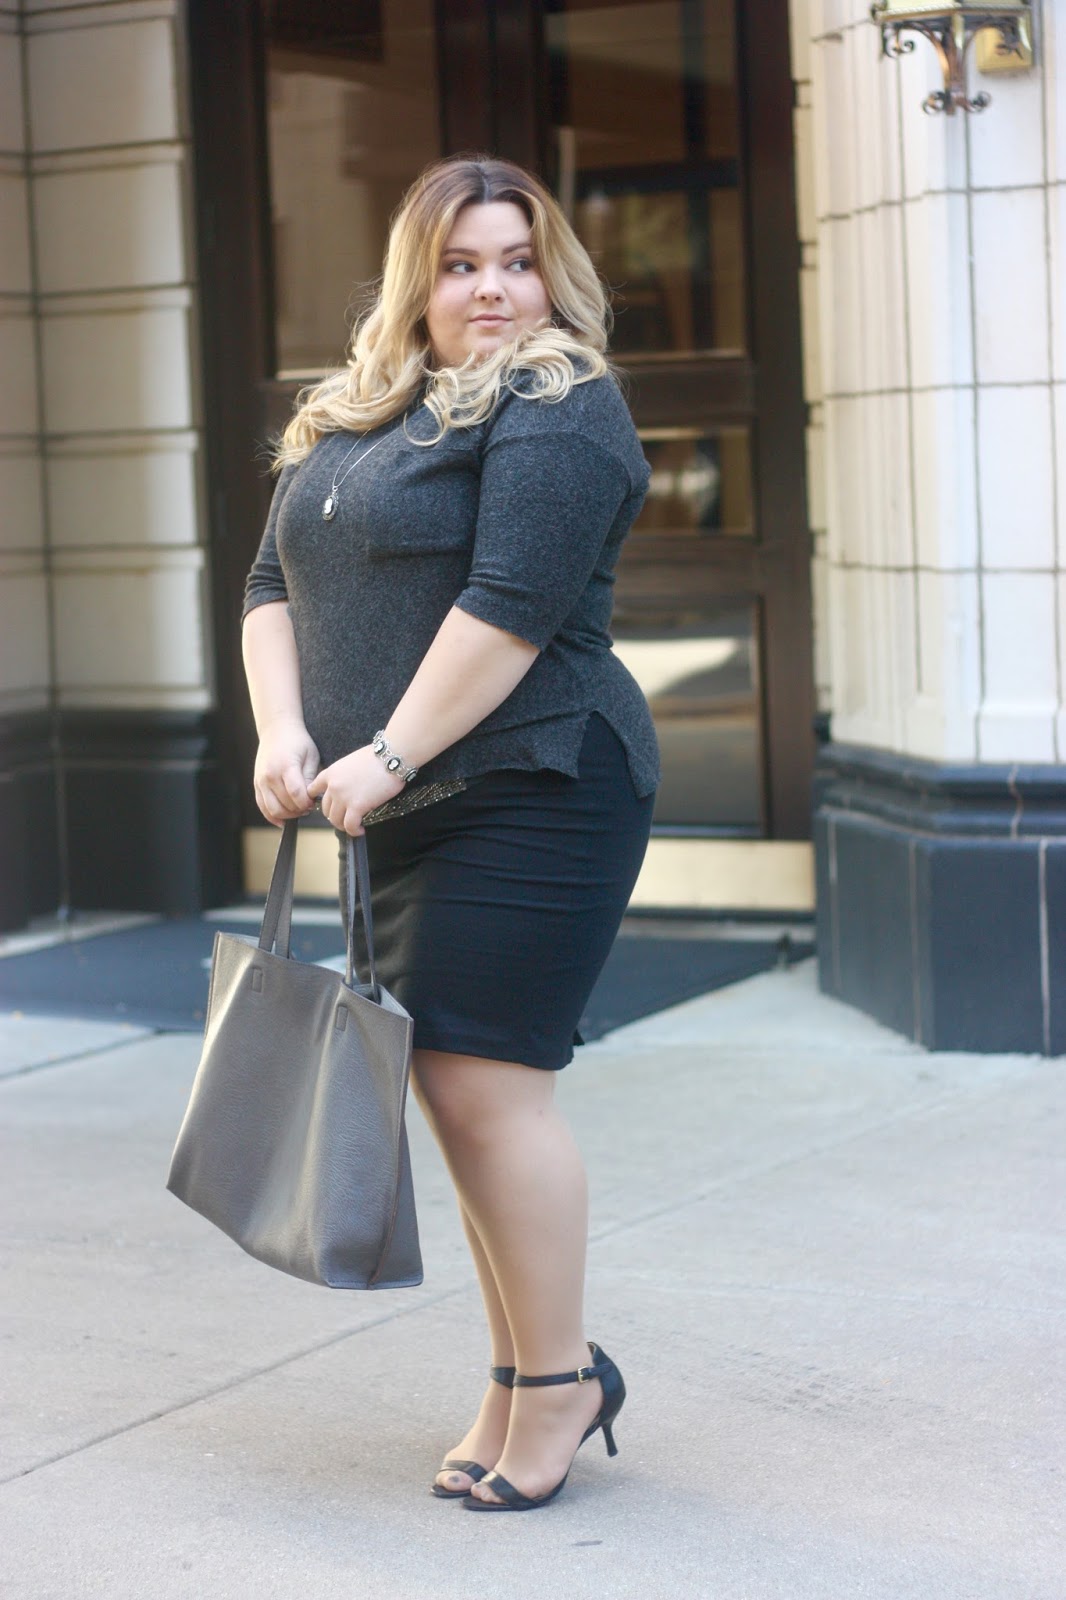 natalie craig, natalie in the city, vintage meet modern, plus size fashion blogger, vintage jewelery, chicago blogger, midwest blogger, lifestyle blogger, fall accessories, fall fashion